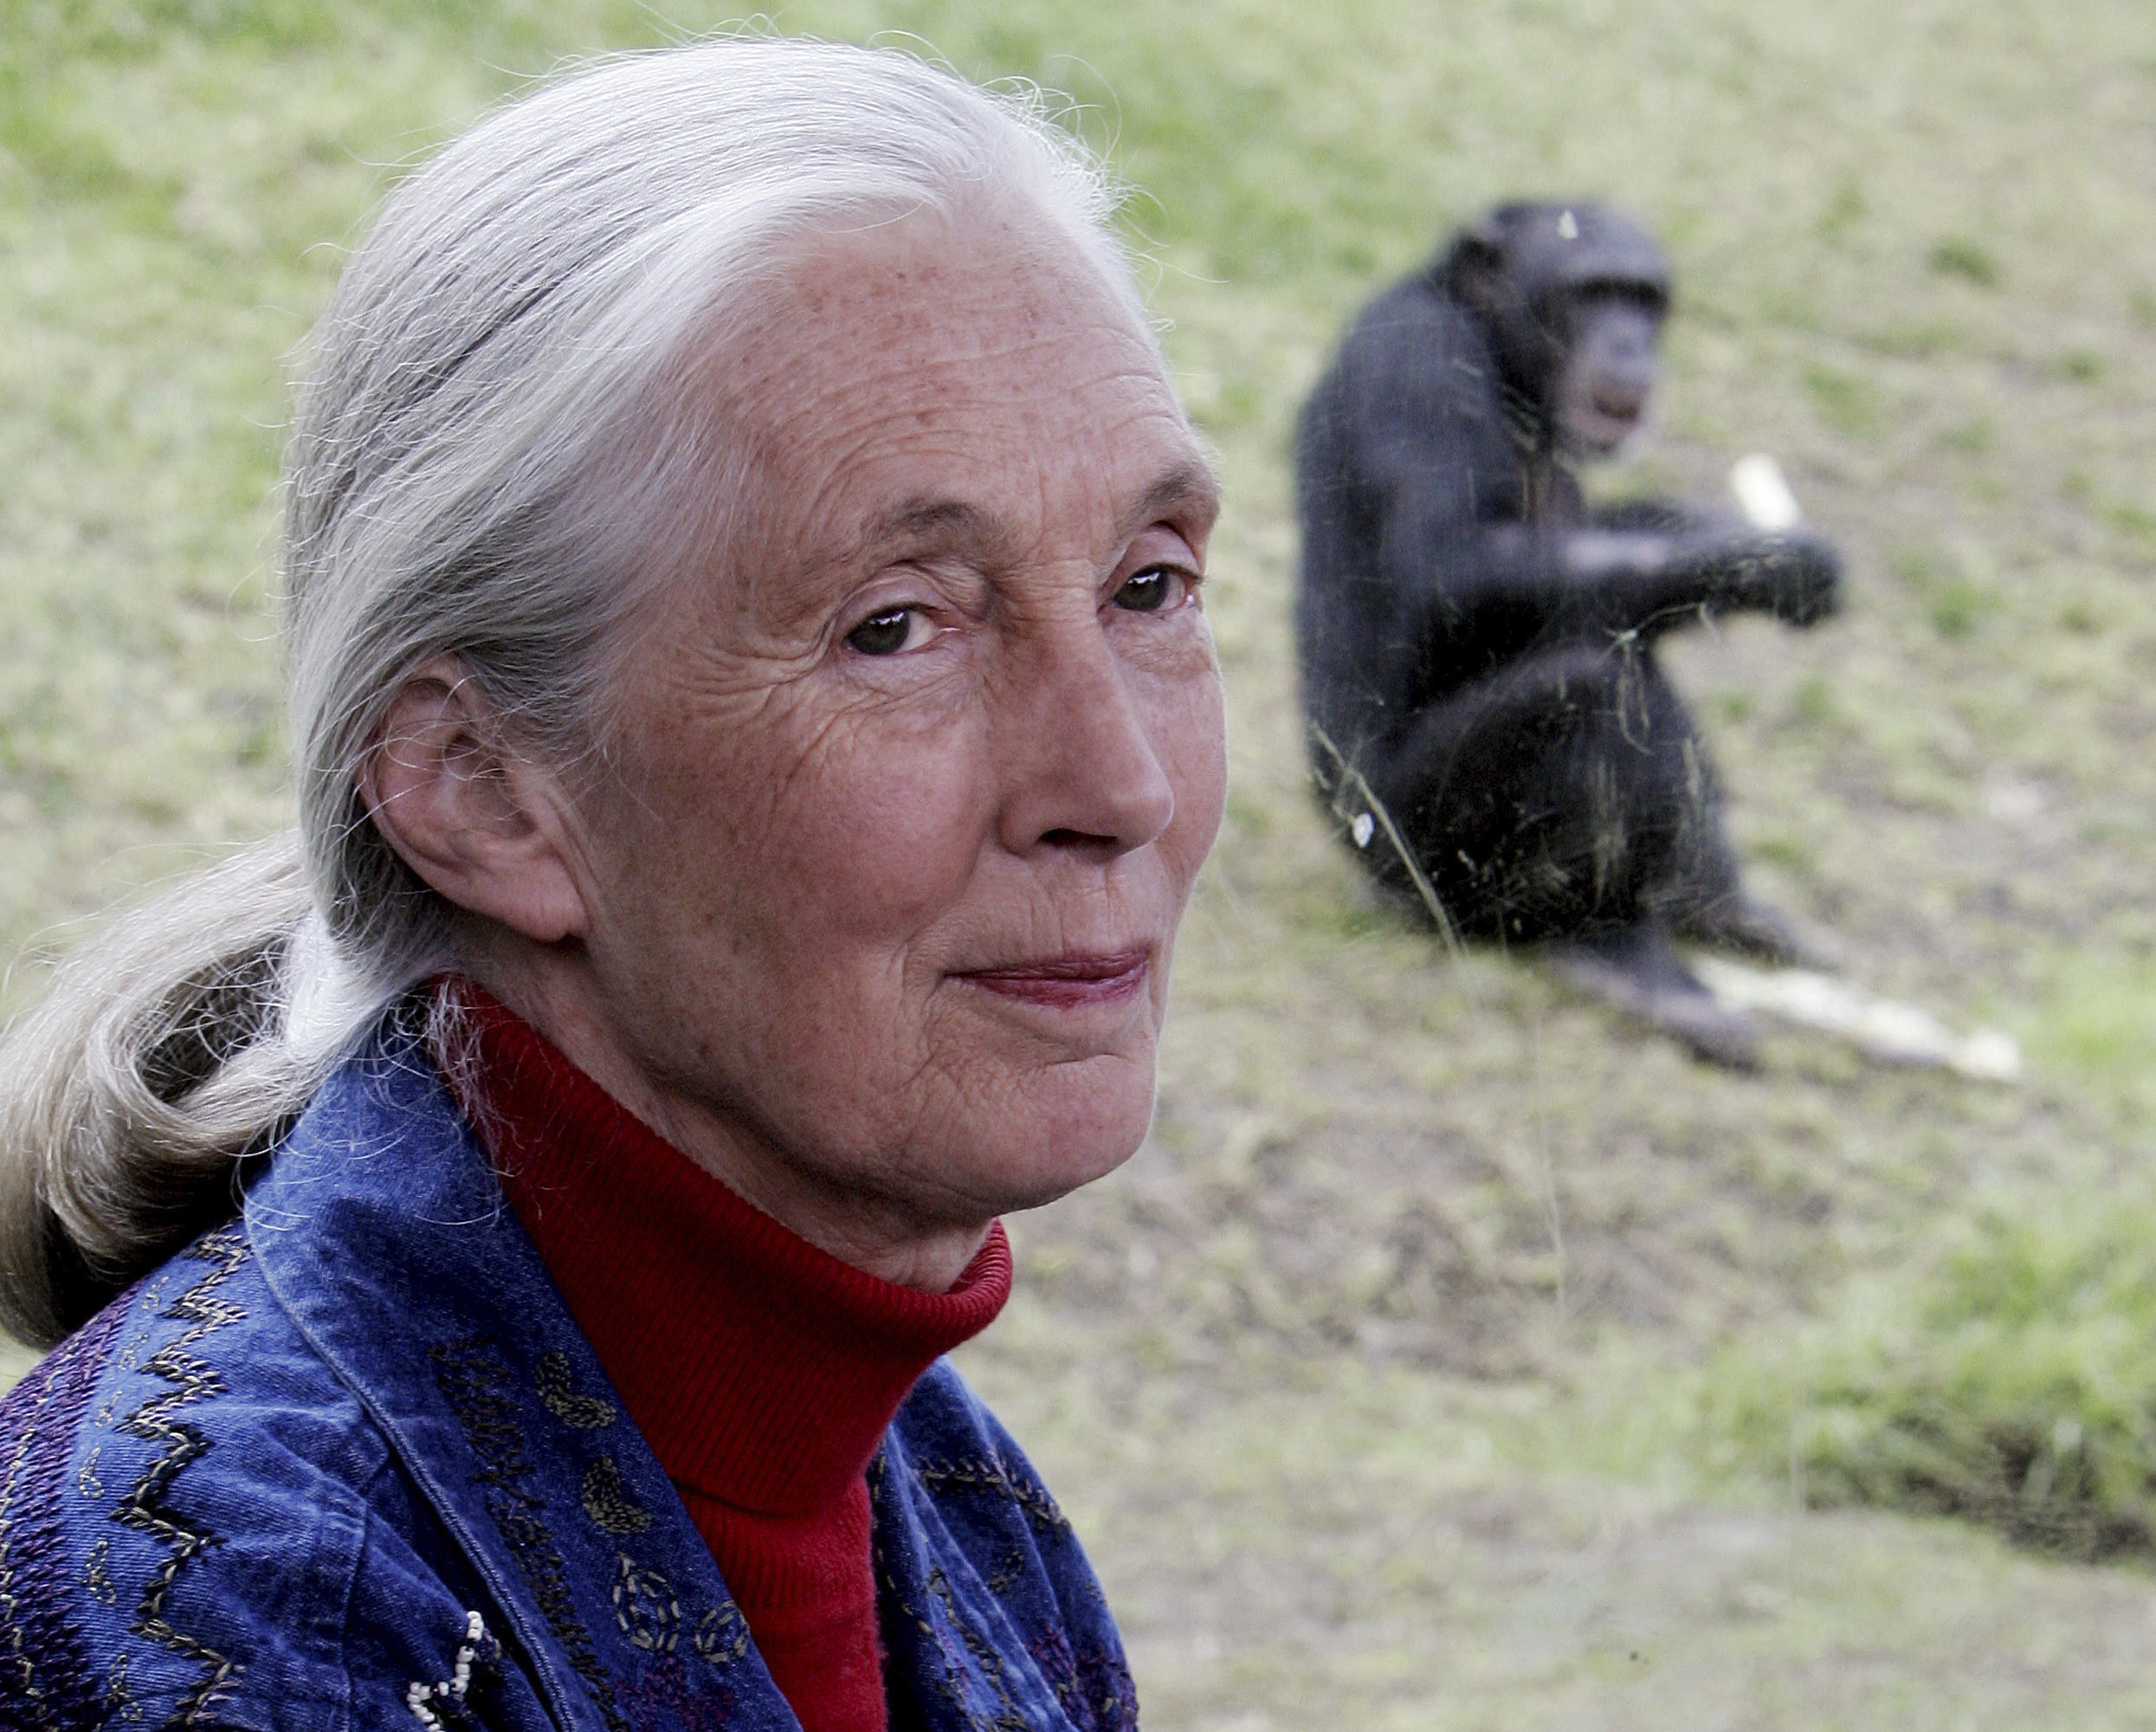 Ethologist and conservationist Jane Goodall sits near a window where behind a chimpanzee eats